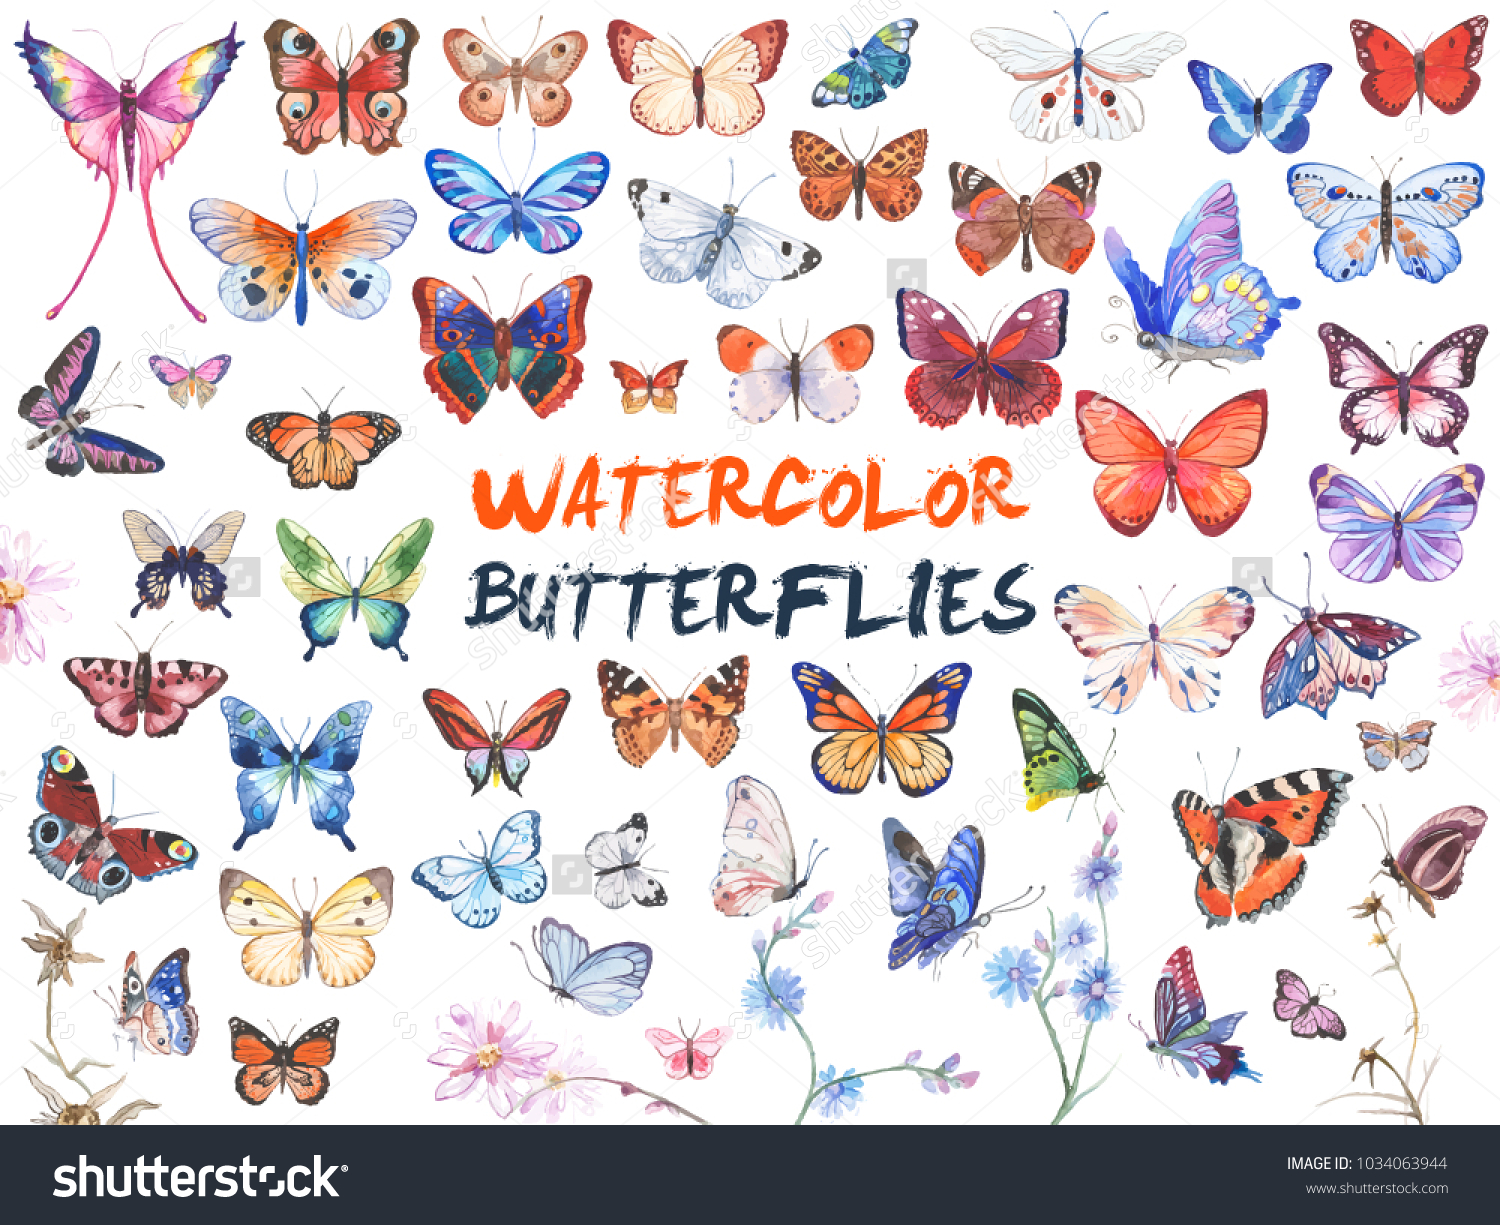 Vector illustration of watercolor butterflies isolated on white background #1034063944